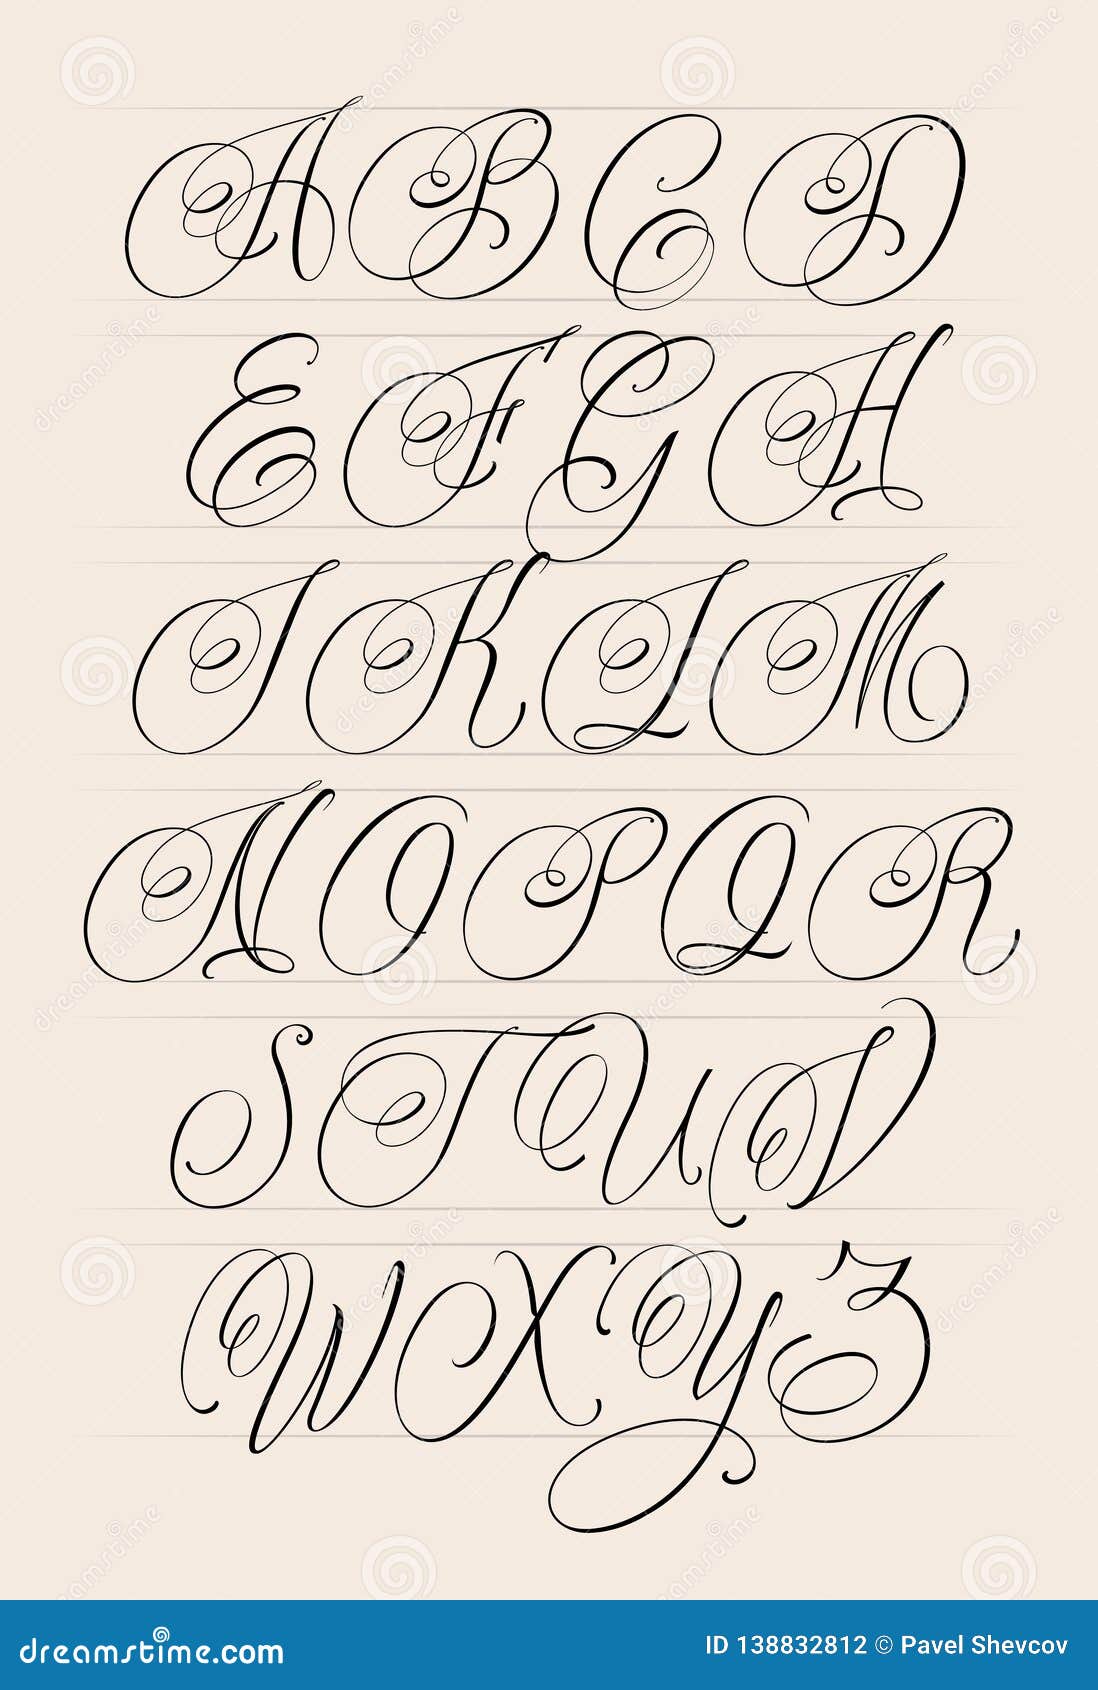 Discover 99+ about tattoo cursive letters super hot .vn